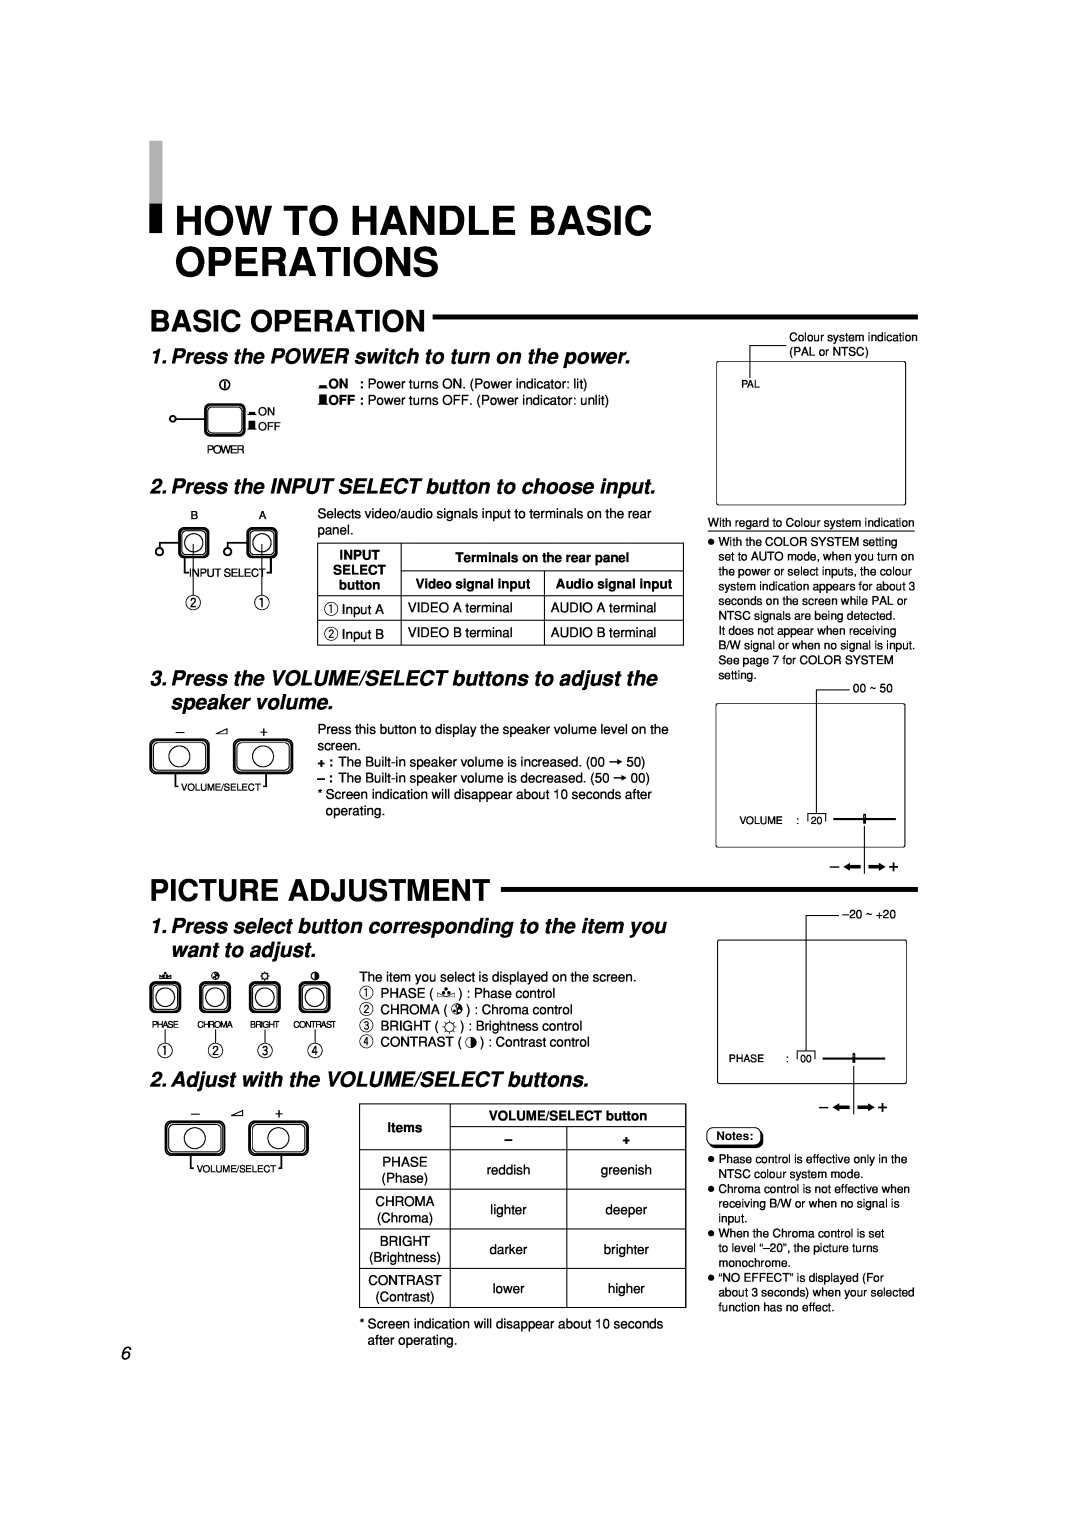 JVC LCT2142-001A-H manual How To Handle Basic Operations, Picture Adjustment, Press the POWER switch to turn on the power 